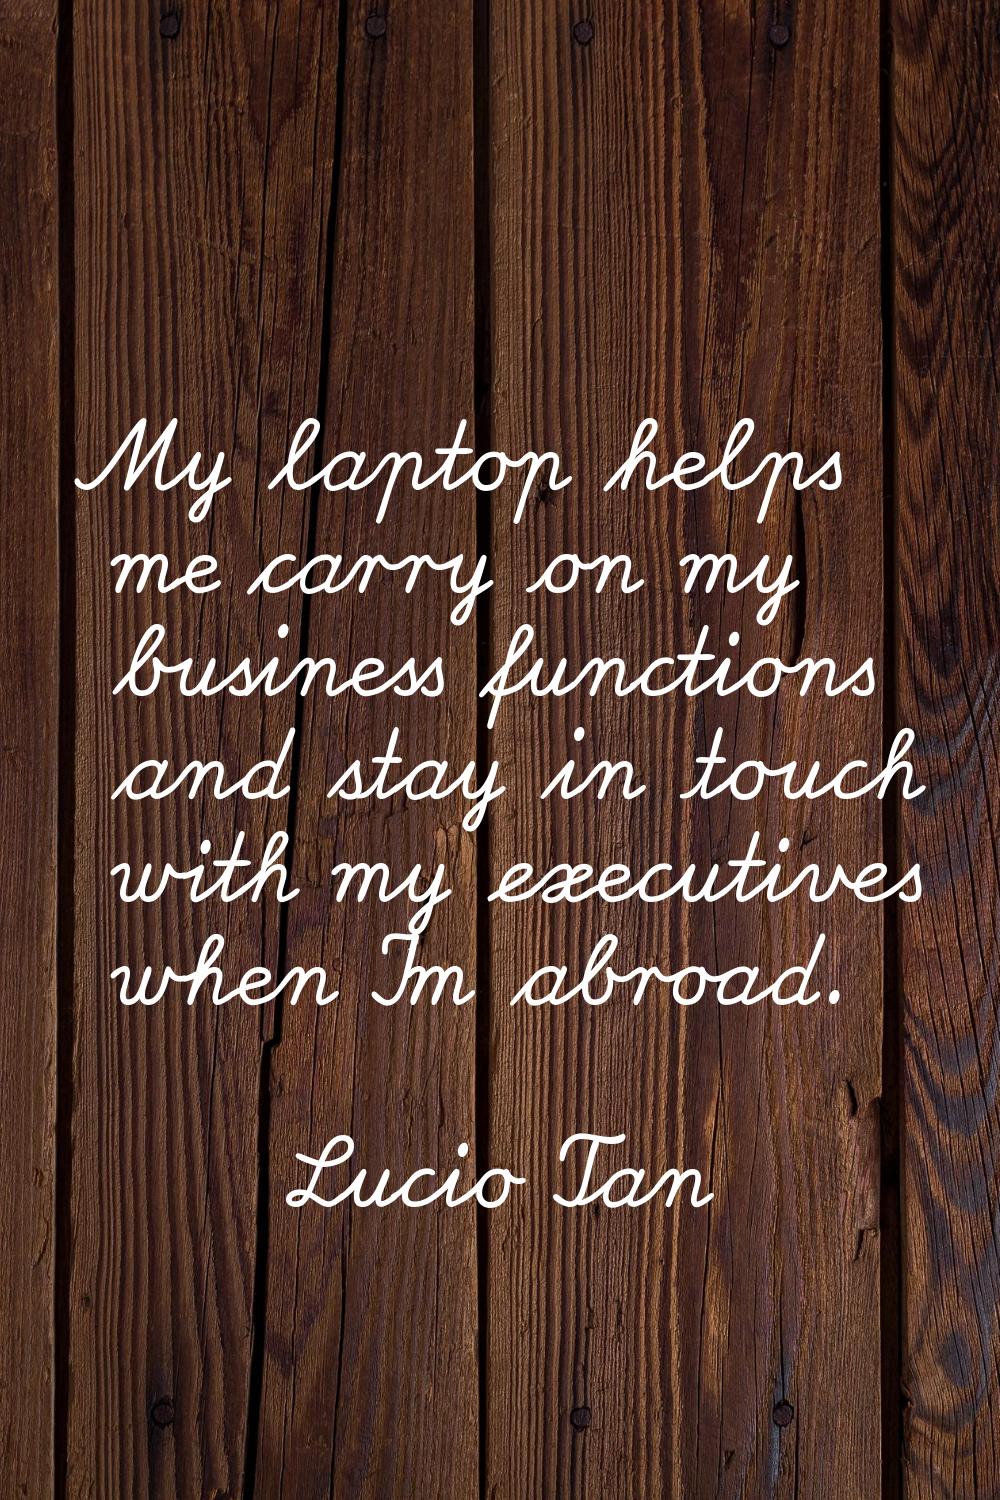 My laptop helps me carry on my business functions and stay in touch with my executives when I'm abr